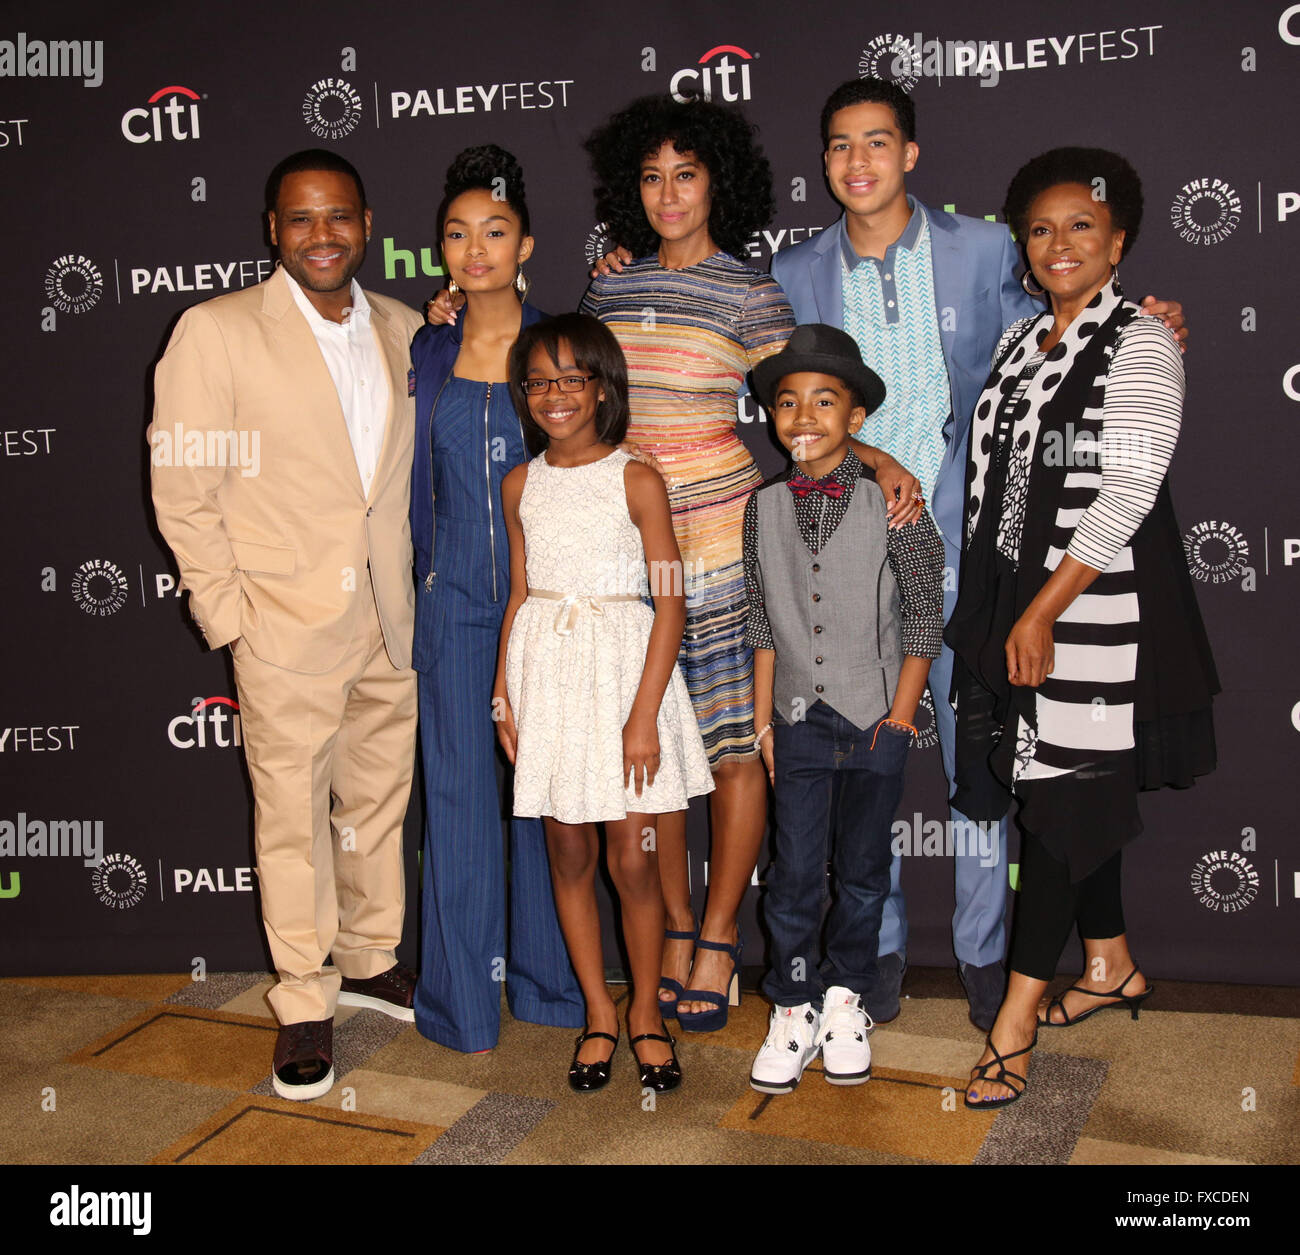 Celebrities attend 33rd annual PaleyFest Los Angeles 'black-ish' at The Dolby Theatre  Featuring: Anthony Anderson, Yara Shahidi, Marsai Martin, Tracee Ellis Ross, Miles Brown, Marcus Scribner, Jenifer Lewis Where: Los Angeles, California, United States W Stock Photo